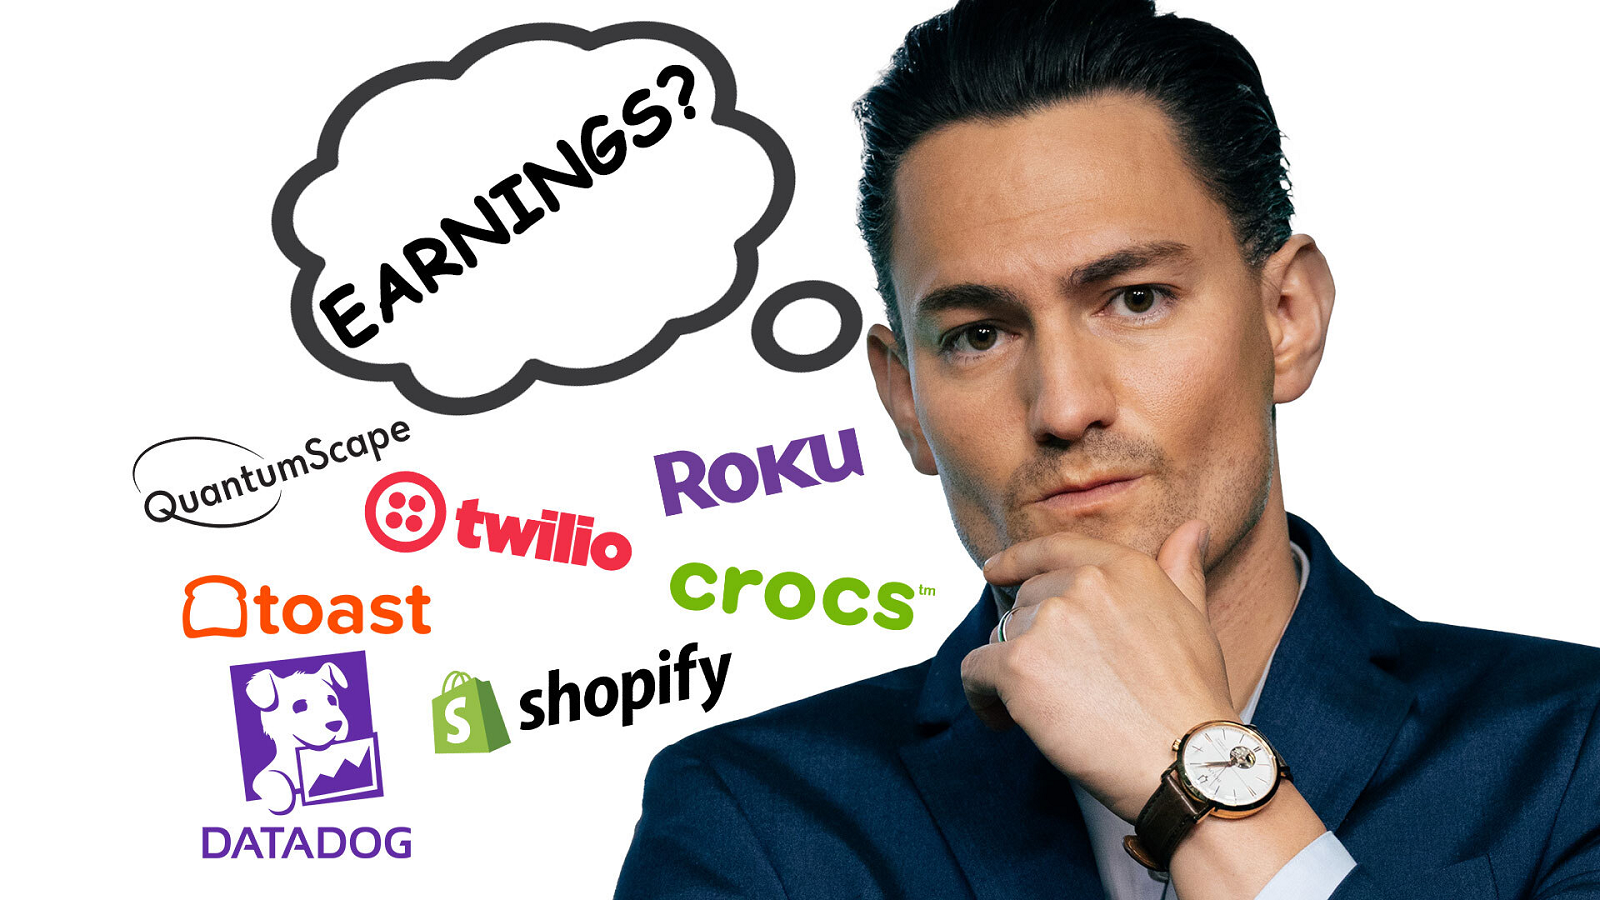 An image of Luke with his hand on his chin, a thought bubble that says, 'earnings?', and several company logos; Roku, Crocs, Shopify, Datadog, Twilio, Toast, QuantumScape